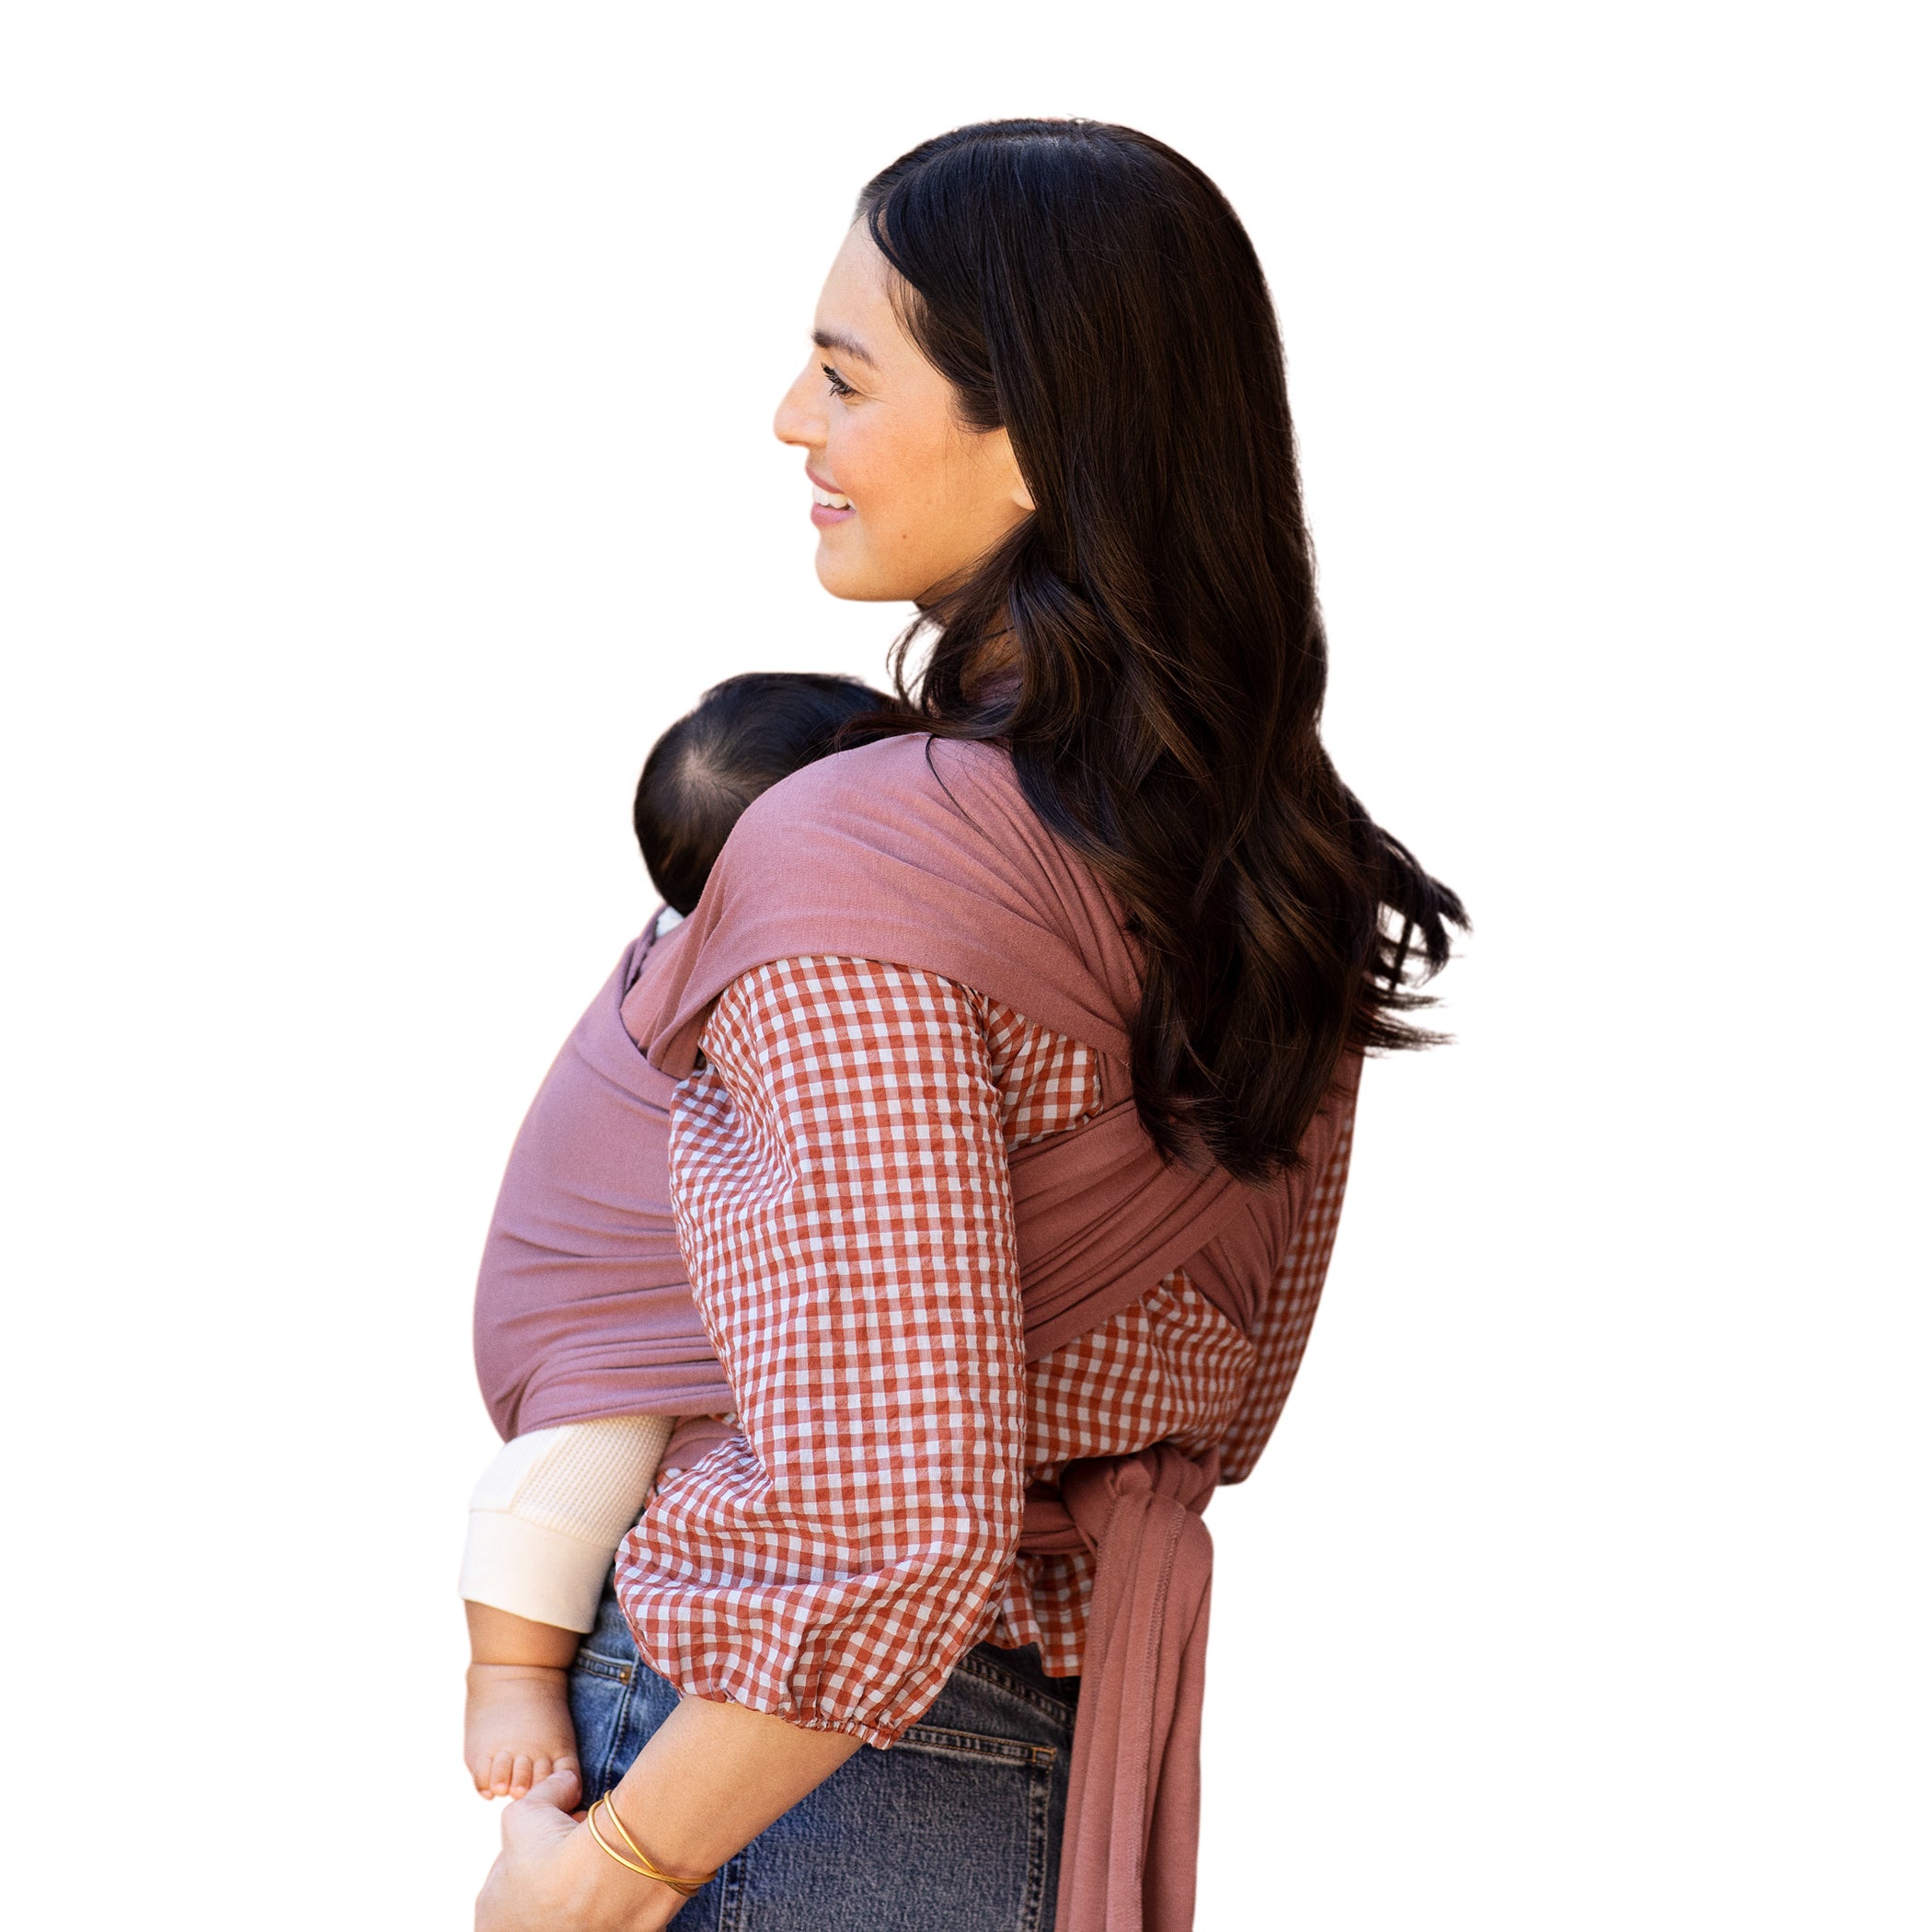 MOBY Wrap Evolution - Terracotta-Baby Wraps-Moby Wrap